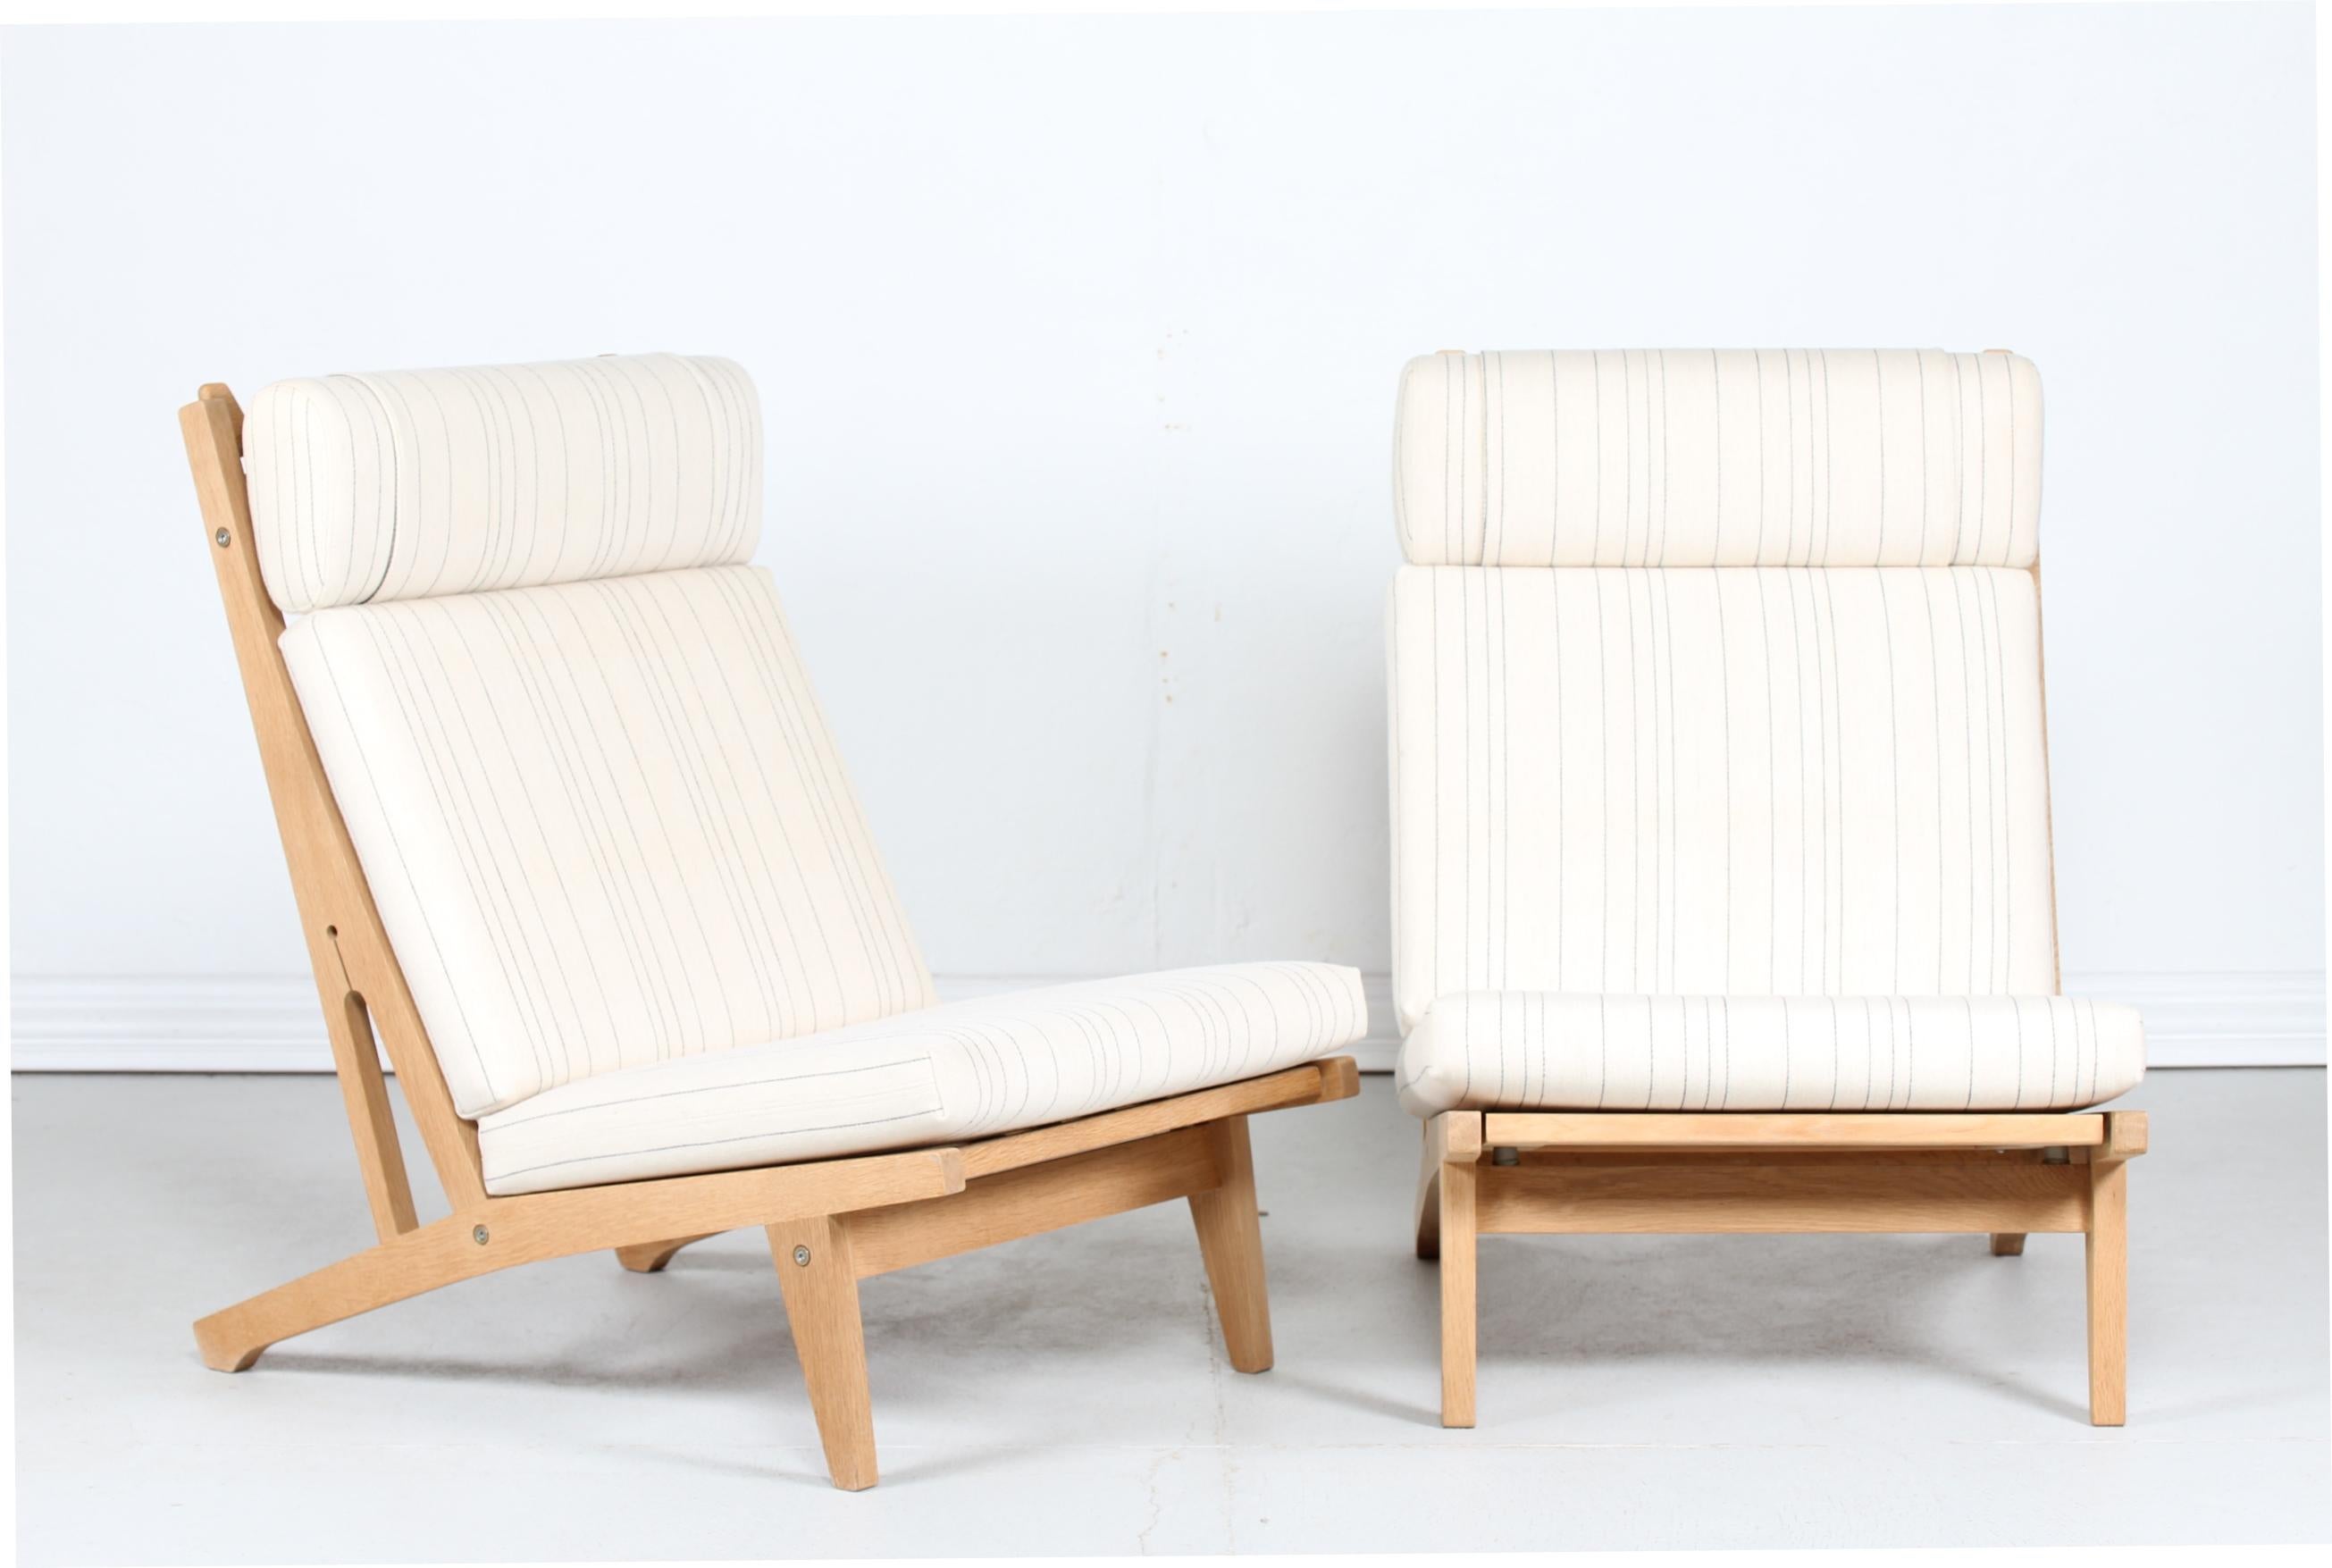 Pair of high lounge chairs model GE 375 by danish designer Hans J. Wegner in 1969
They are manufactored in the 1970s of genuine oak with soap treatment and has got almost new wool seat cover and foam inside.
The chairs remain in very good